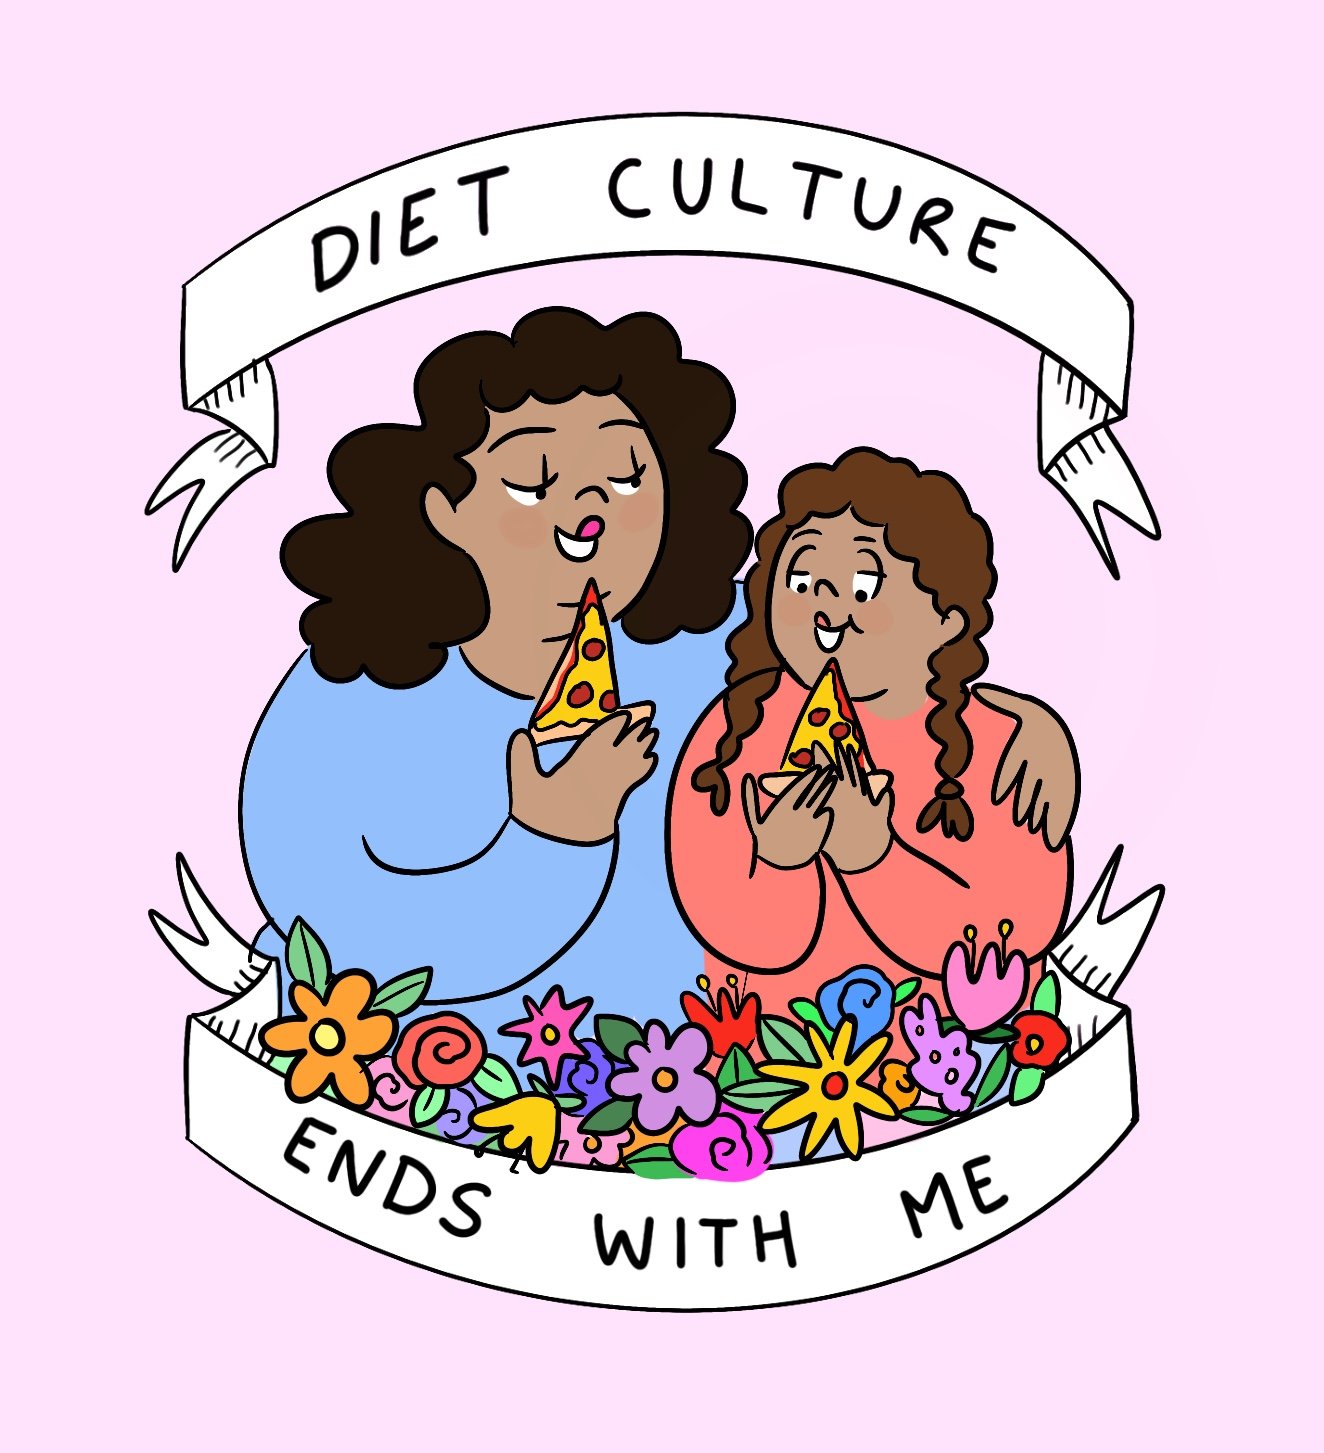 Image of Diet Culture Ends With Me - Pink